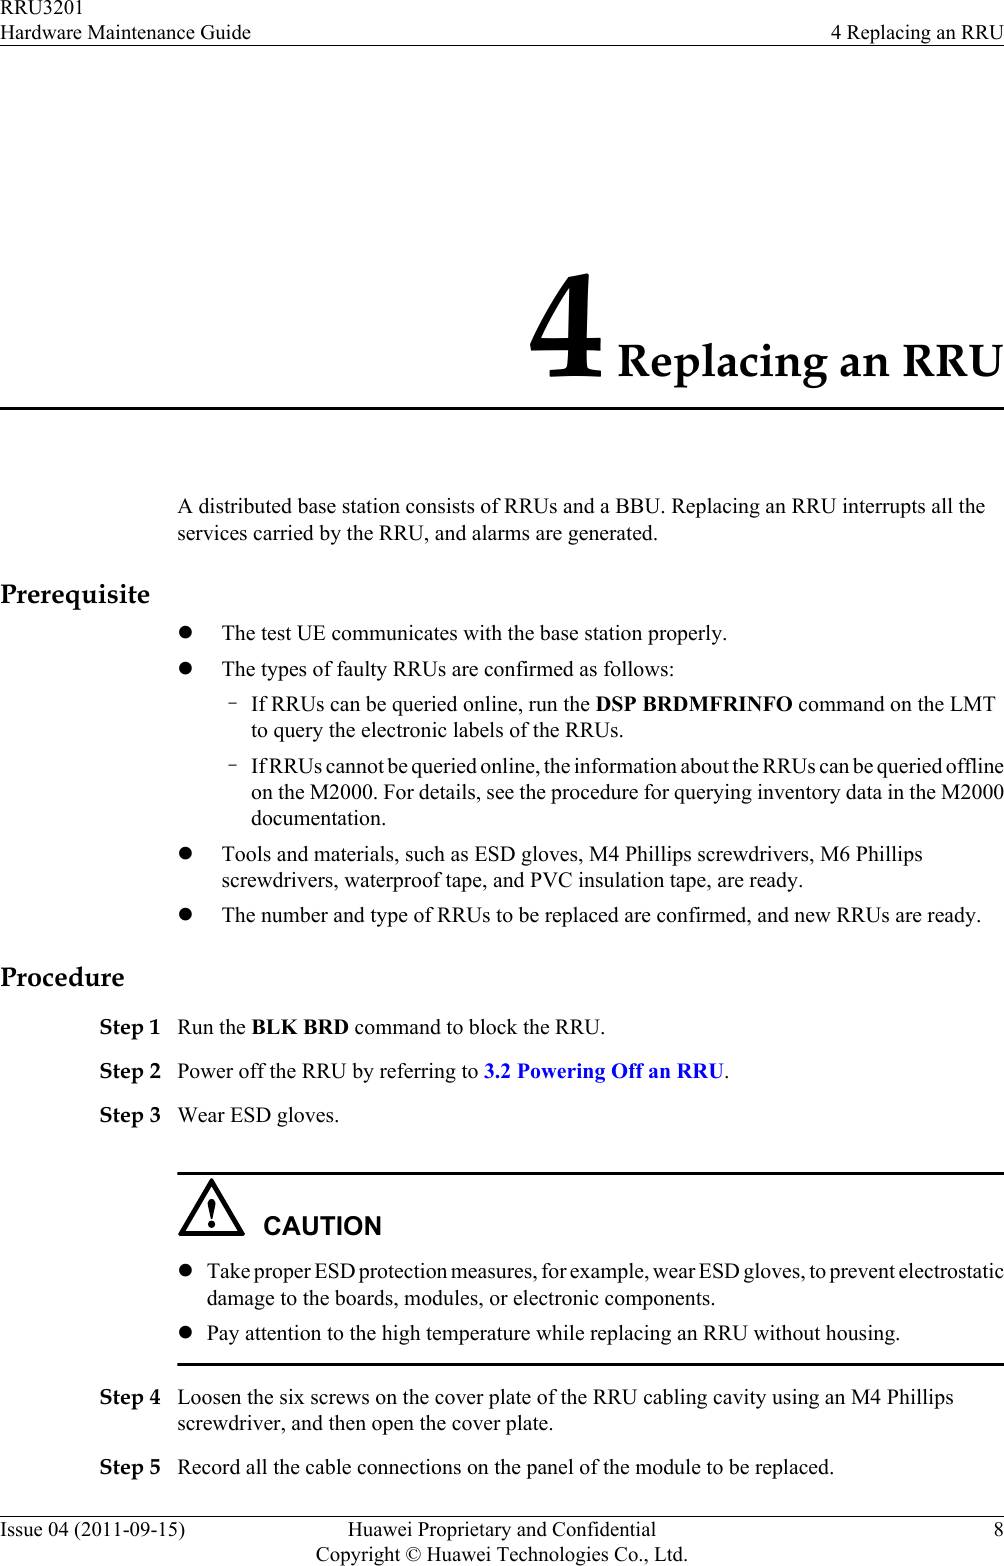 4 Replacing an RRUA distributed base station consists of RRUs and a BBU. Replacing an RRU interrupts all theservices carried by the RRU, and alarms are generated.PrerequisitelThe test UE communicates with the base station properly.lThe types of faulty RRUs are confirmed as follows:–If RRUs can be queried online, run the DSP BRDMFRINFO command on the LMTto query the electronic labels of the RRUs.–If RRUs cannot be queried online, the information about the RRUs can be queried offlineon the M2000. For details, see the procedure for querying inventory data in the M2000documentation.lTools and materials, such as ESD gloves, M4 Phillips screwdrivers, M6 Phillipsscrewdrivers, waterproof tape, and PVC insulation tape, are ready.lThe number and type of RRUs to be replaced are confirmed, and new RRUs are ready.ProcedureStep 1 Run the BLK BRD command to block the RRU.Step 2 Power off the RRU by referring to 3.2 Powering Off an RRU.Step 3 Wear ESD gloves.CAUTIONlTake proper ESD protection measures, for example, wear ESD gloves, to prevent electrostaticdamage to the boards, modules, or electronic components.lPay attention to the high temperature while replacing an RRU without housing.Step 4 Loosen the six screws on the cover plate of the RRU cabling cavity using an M4 Phillipsscrewdriver, and then open the cover plate.Step 5 Record all the cable connections on the panel of the module to be replaced.RRU3201Hardware Maintenance Guide 4 Replacing an RRUIssue 04 (2011-09-15) Huawei Proprietary and ConfidentialCopyright © Huawei Technologies Co., Ltd.8